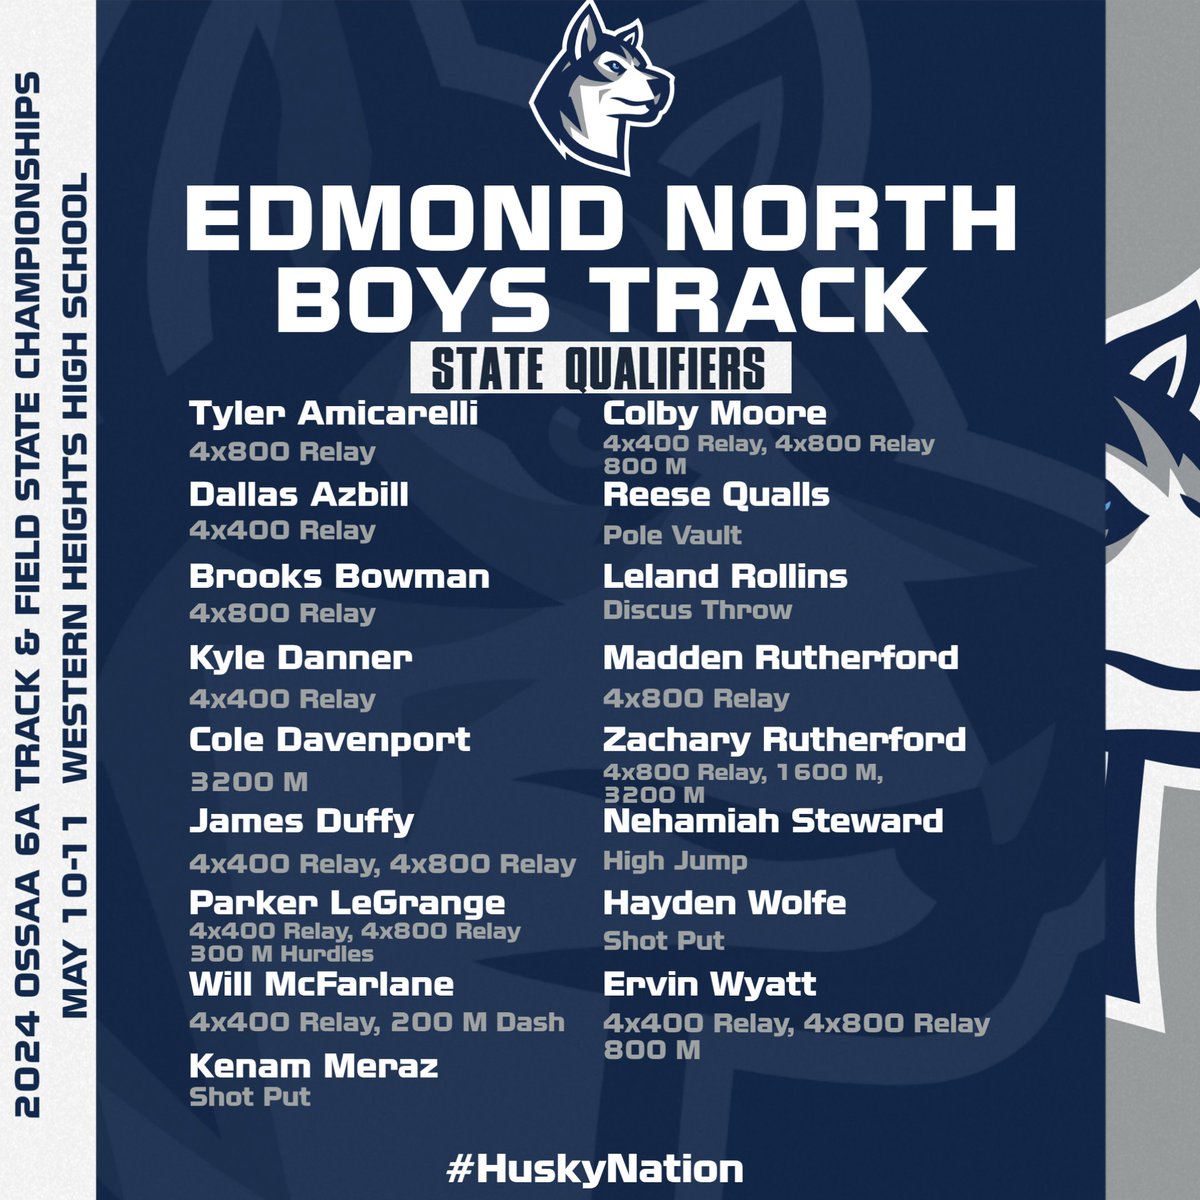 Congrats to all of our Edmond North Boys Track 2024 State Qualifiers! They will be competing in the 6A State Track Meet this Friday & Saturday at Western Heights High School! #HuskyNation #uN1ty